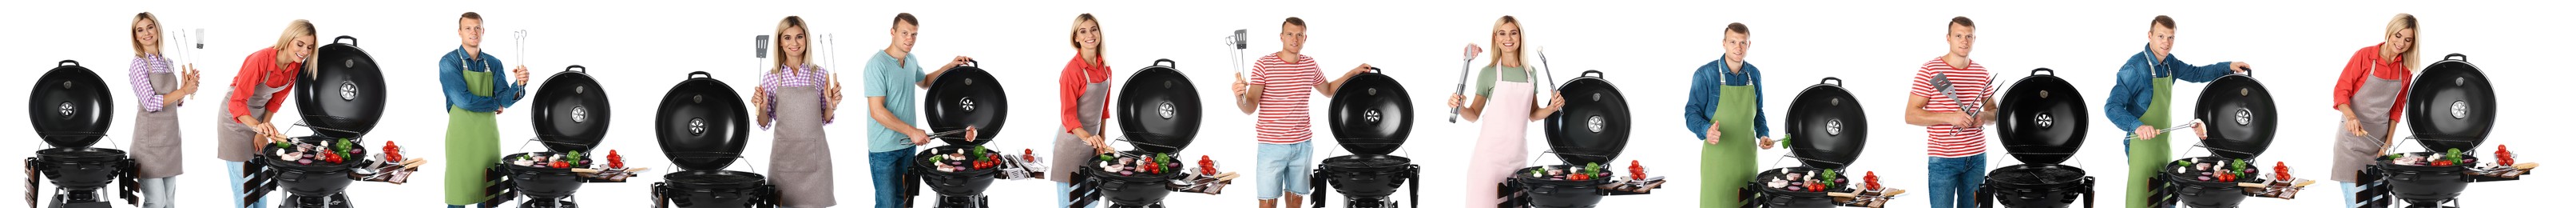 Image of Collage with photos of man and woman cooking on barbecue grill against white background. Banner design